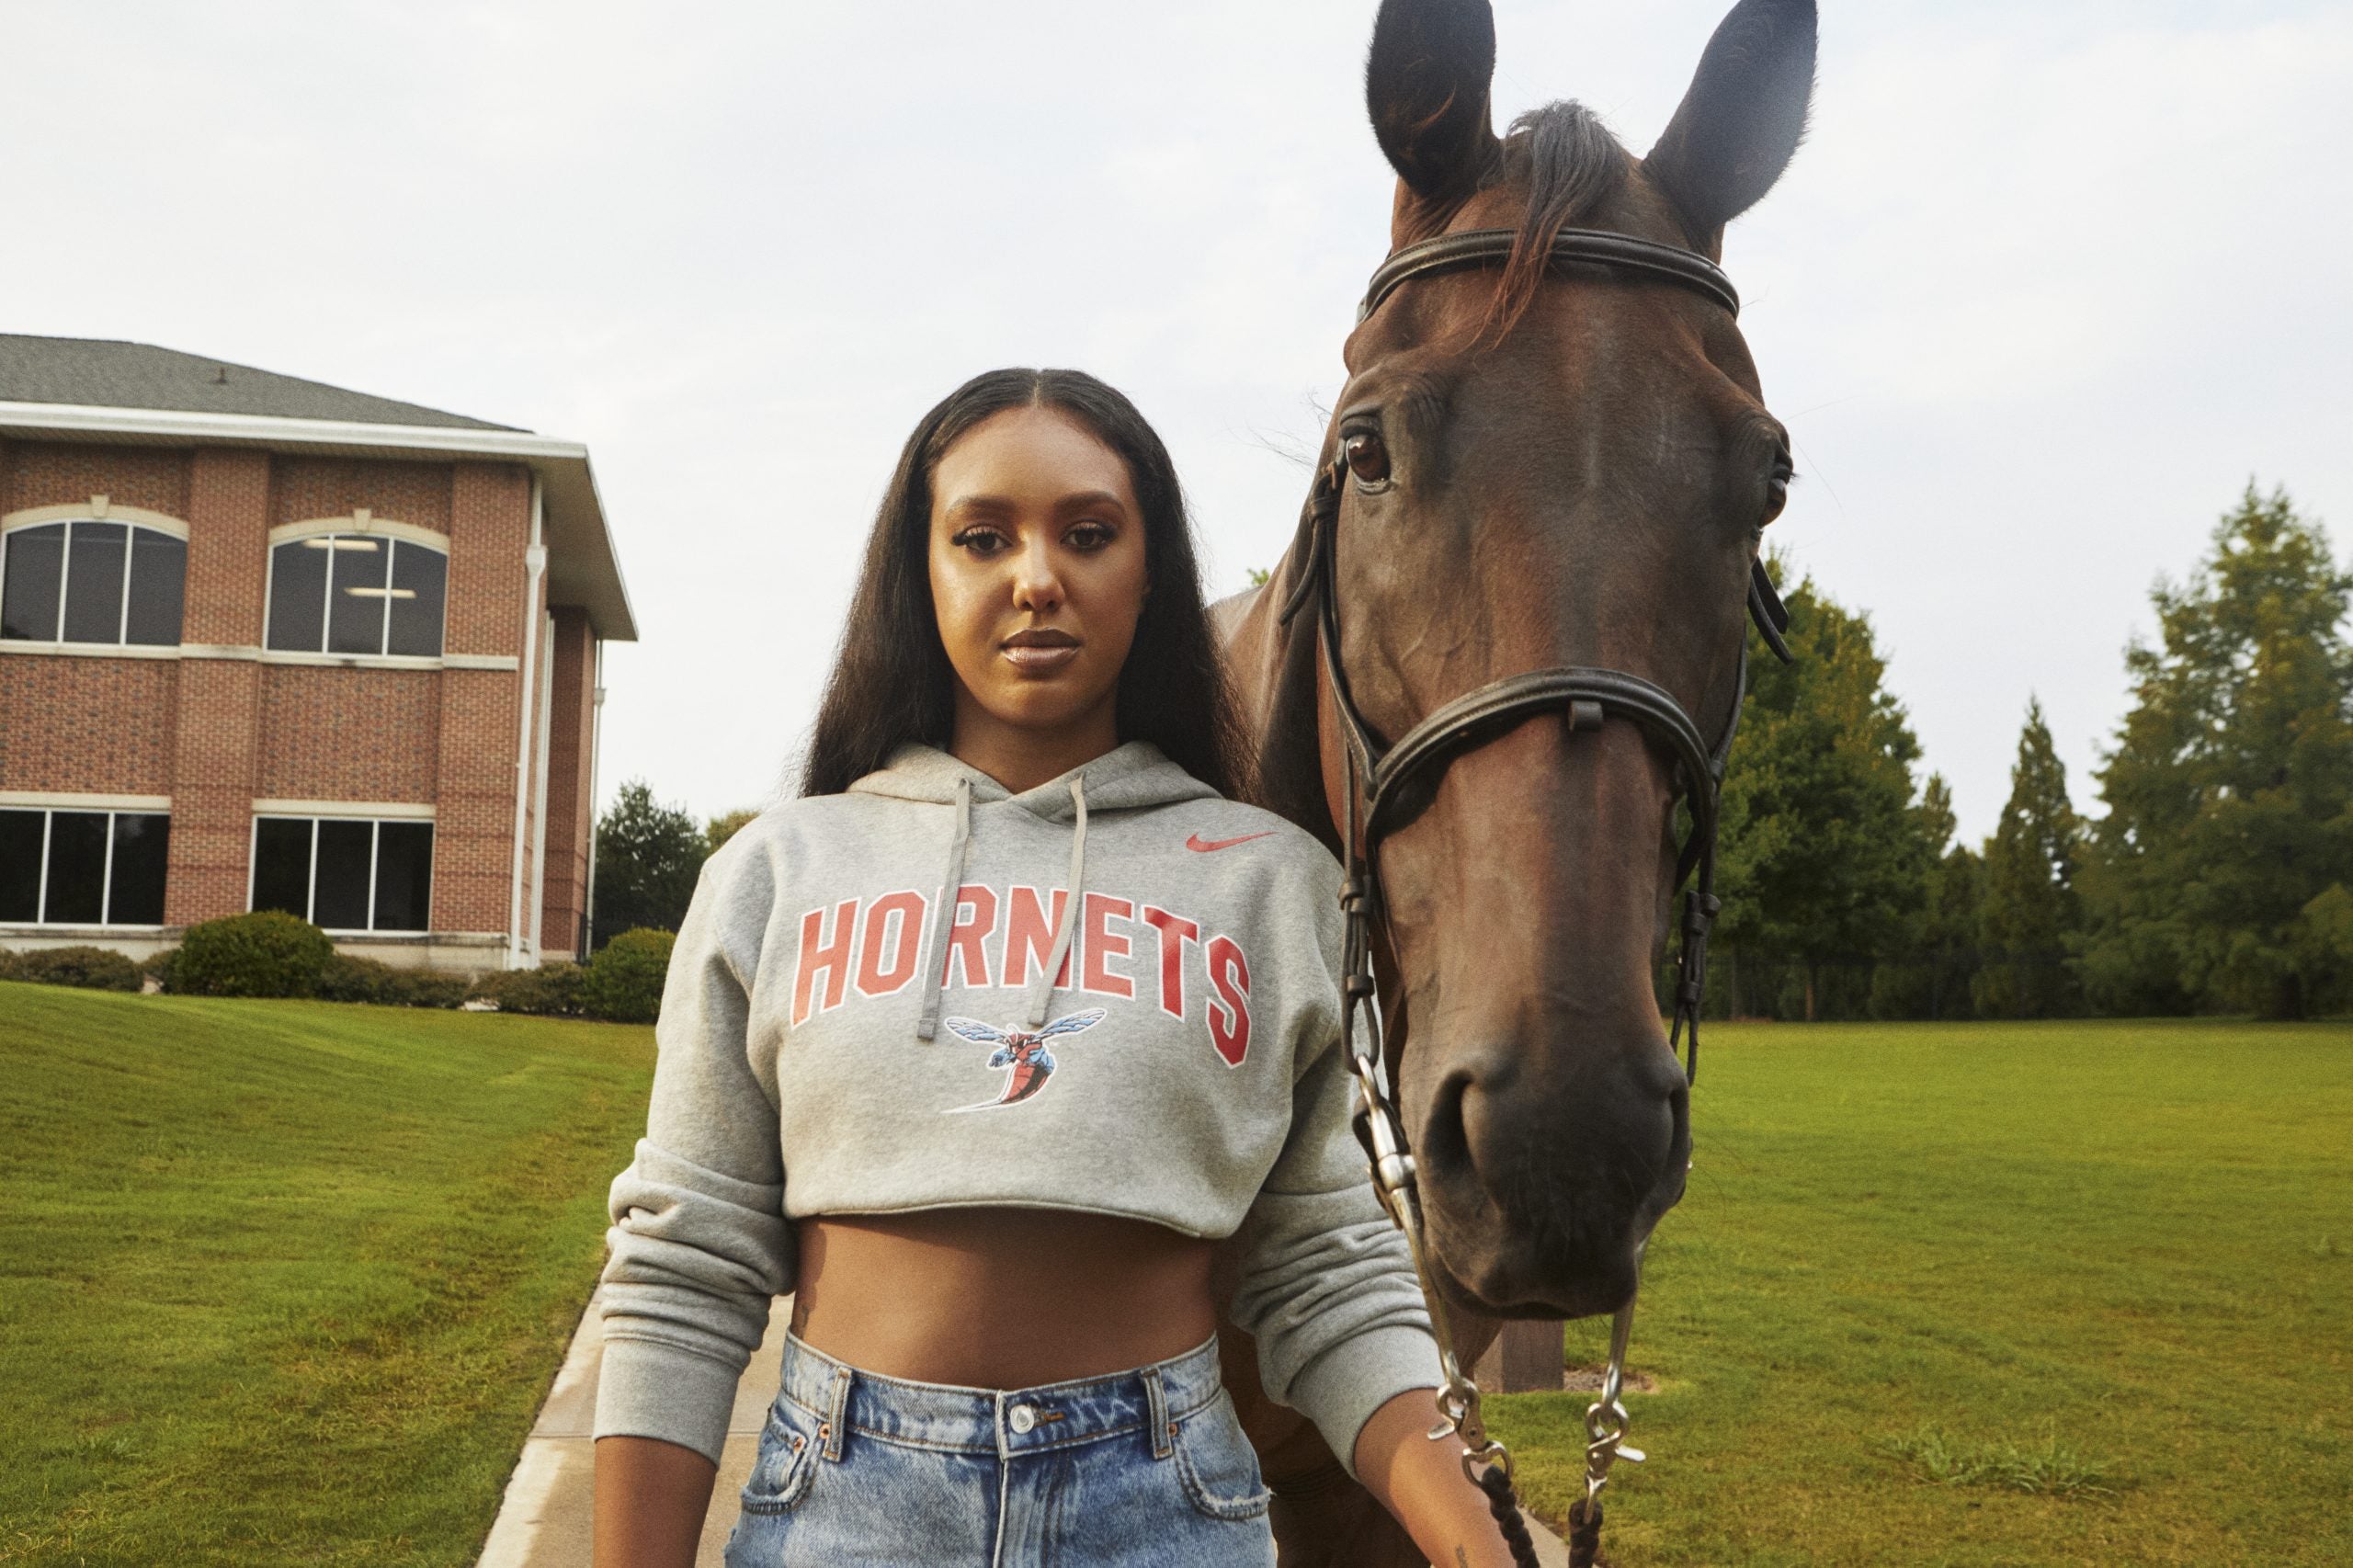 Introducing The Latest Class Of Nike HBCU Yardrunners